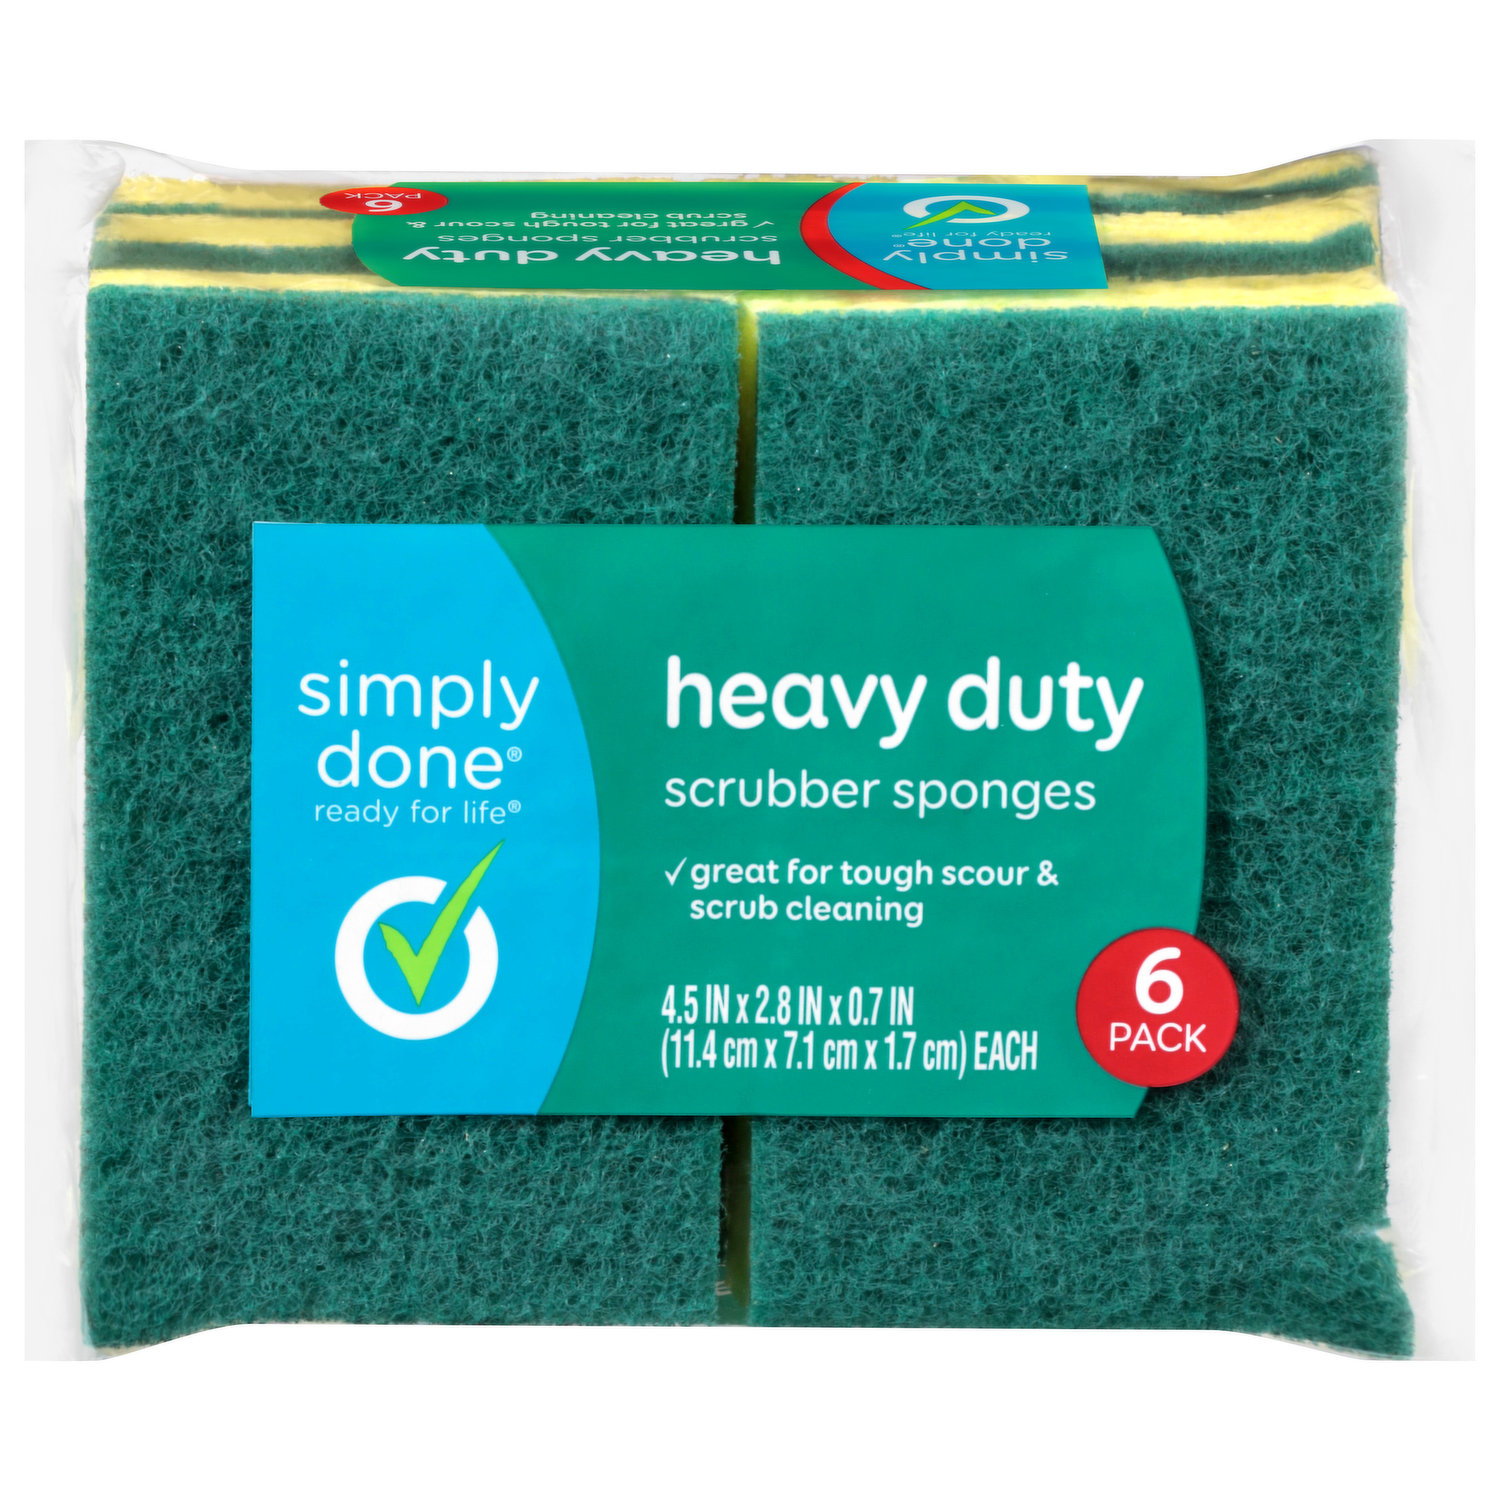 Simply Done Sponges, All-Purpose, Large, 2 Pack